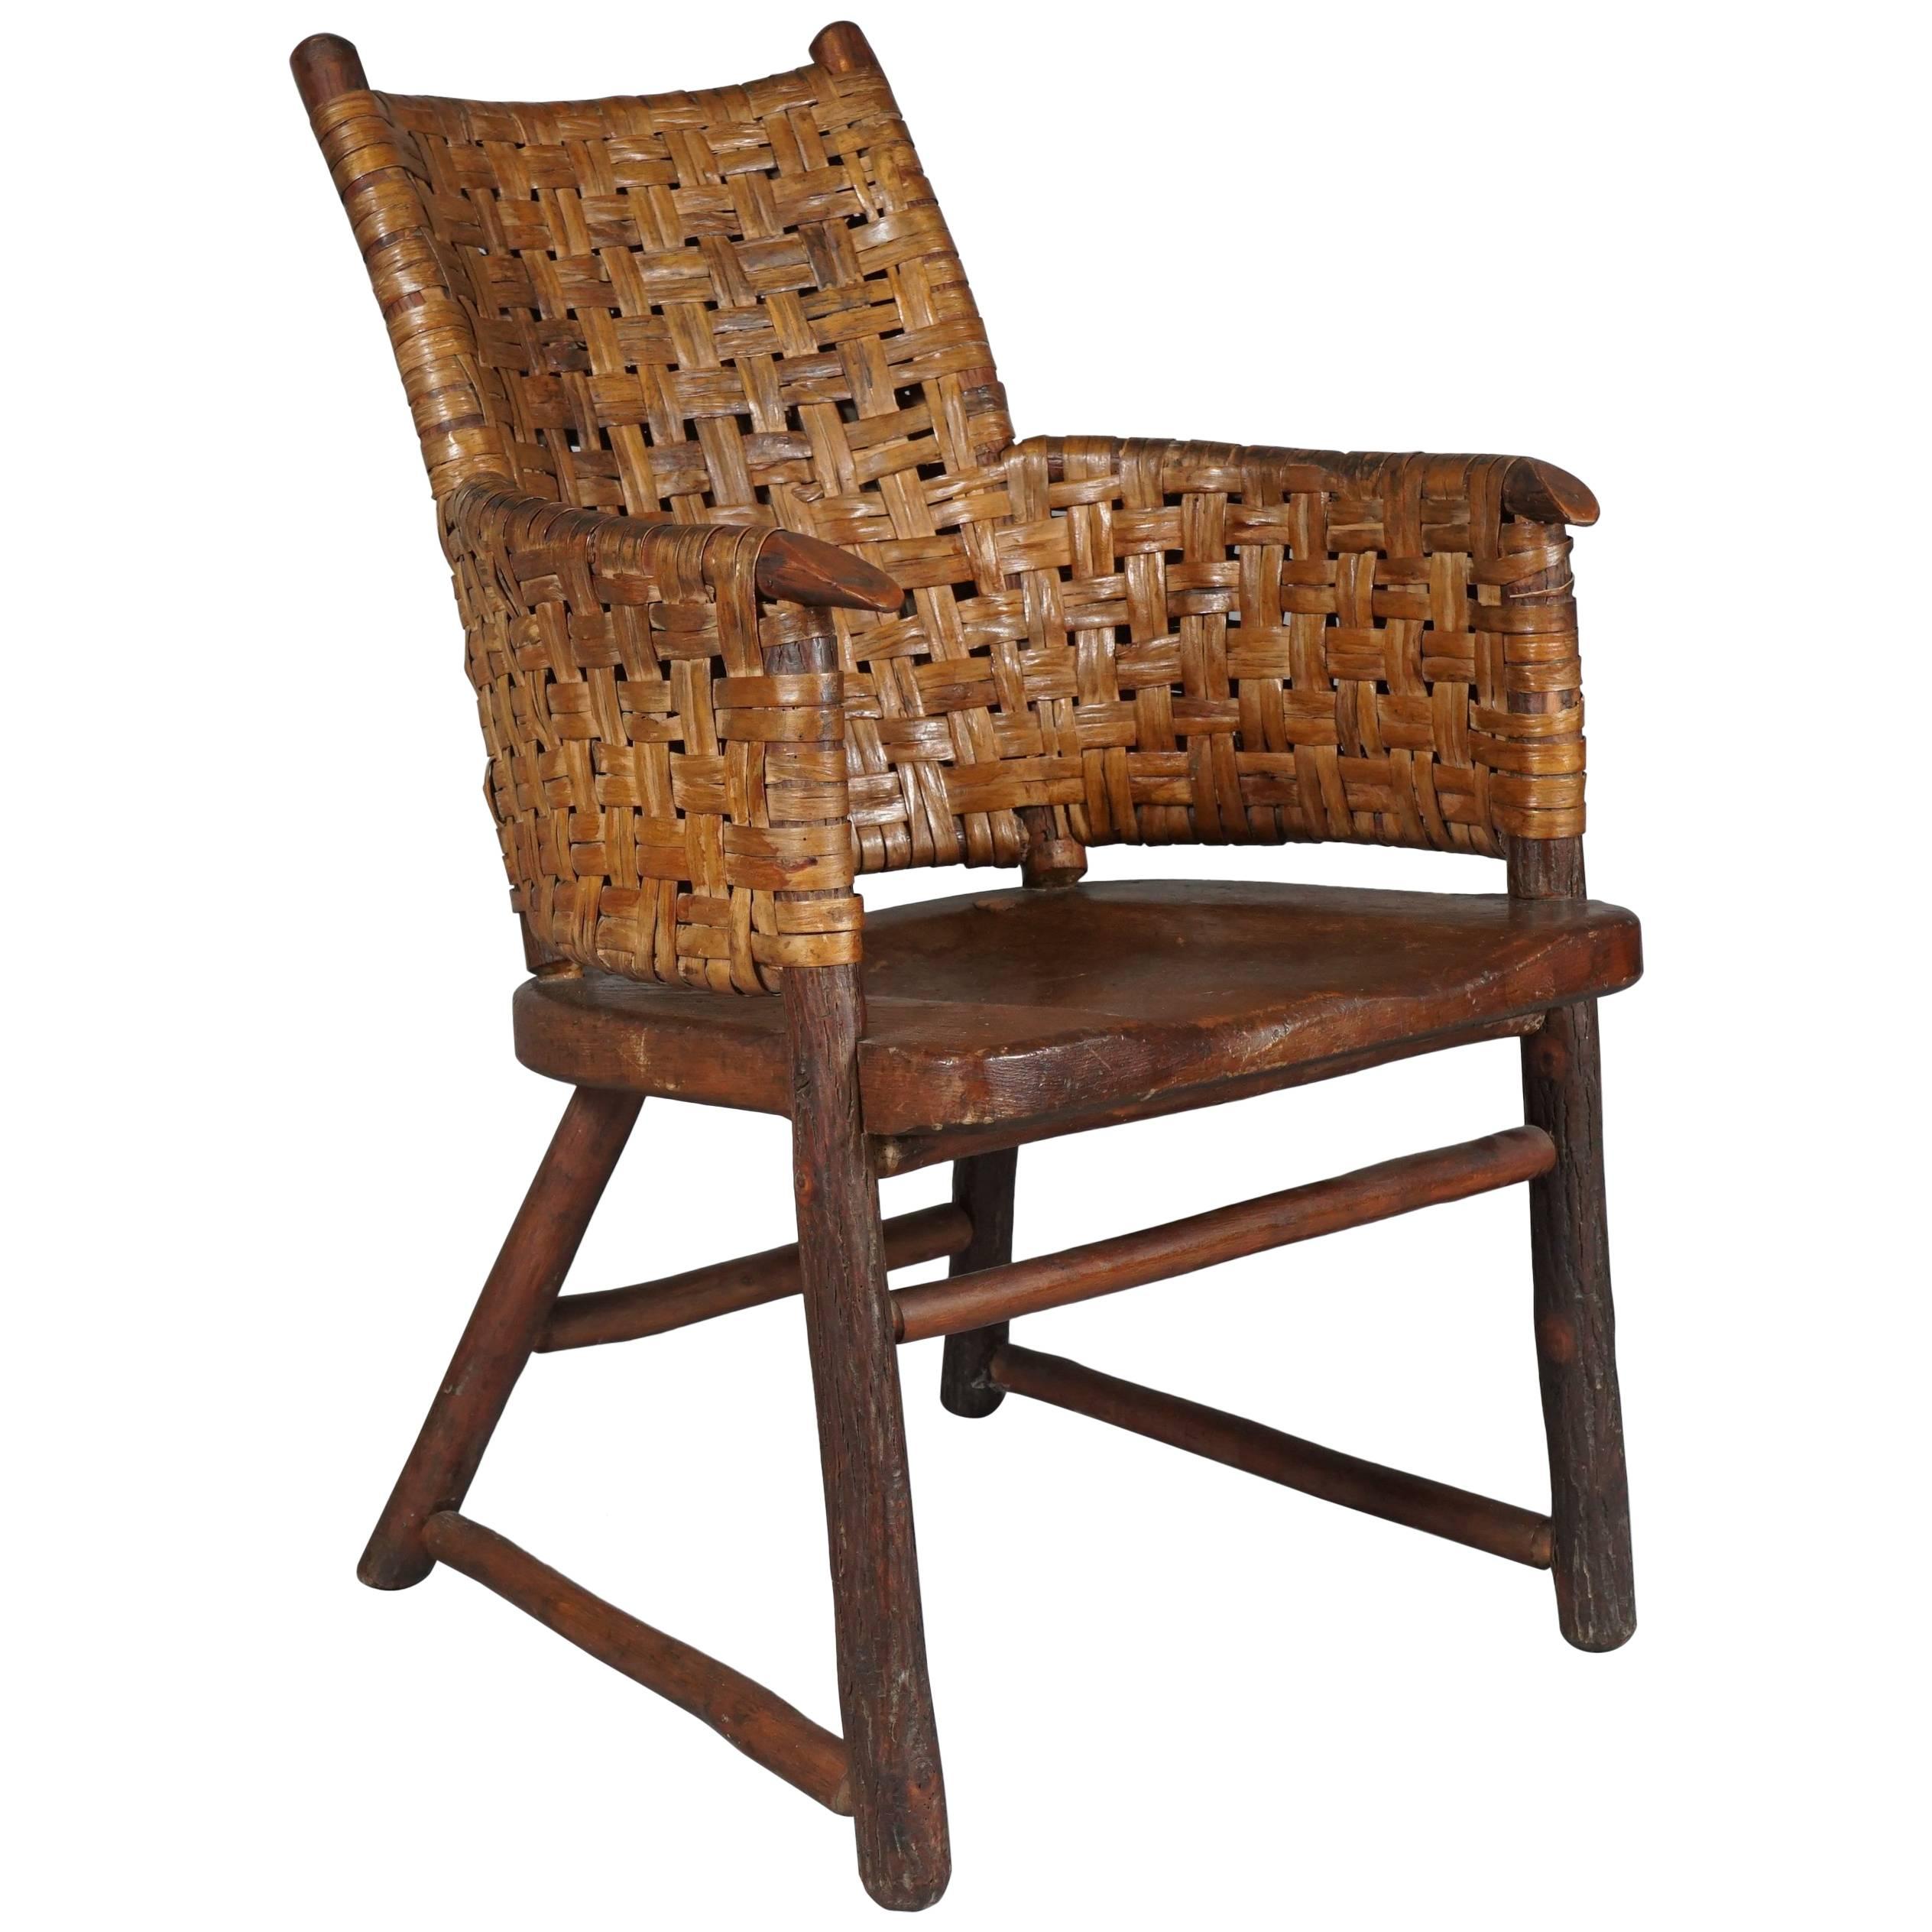 "Old Hickory Fruniture Co." Armchair